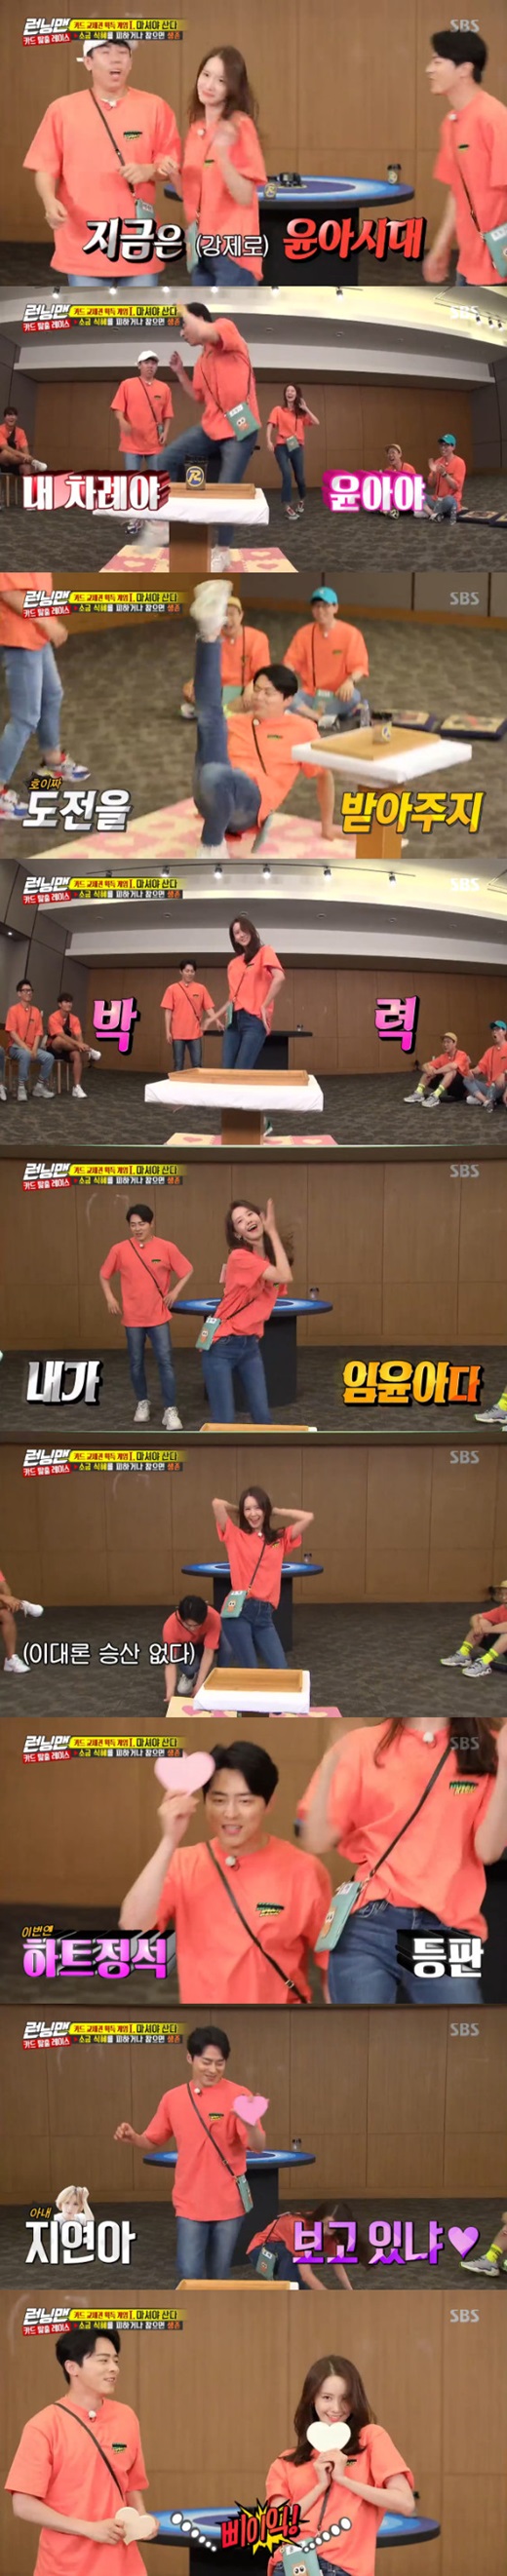 Actor Jo Jung-suk and group Girls Generation Im Yoon-ah had a fierce dance showdown.On SBS Running Man broadcasted on the 21st, Jo Jung-suk, Girls Generation Im Yoon-ah appeared in the movie Exit together.On this days dance mission, Jo Jung-suk and Im Yoon-ah showed their dance skills.Im Yoon-ah completely performed the dances of junior singers such as Twices What is love and Cheonghas Twelve oclock already.Jo Jung-suk then showed off his brilliant retro dance and break dance, and laughed with his passion to use props improvisedly.